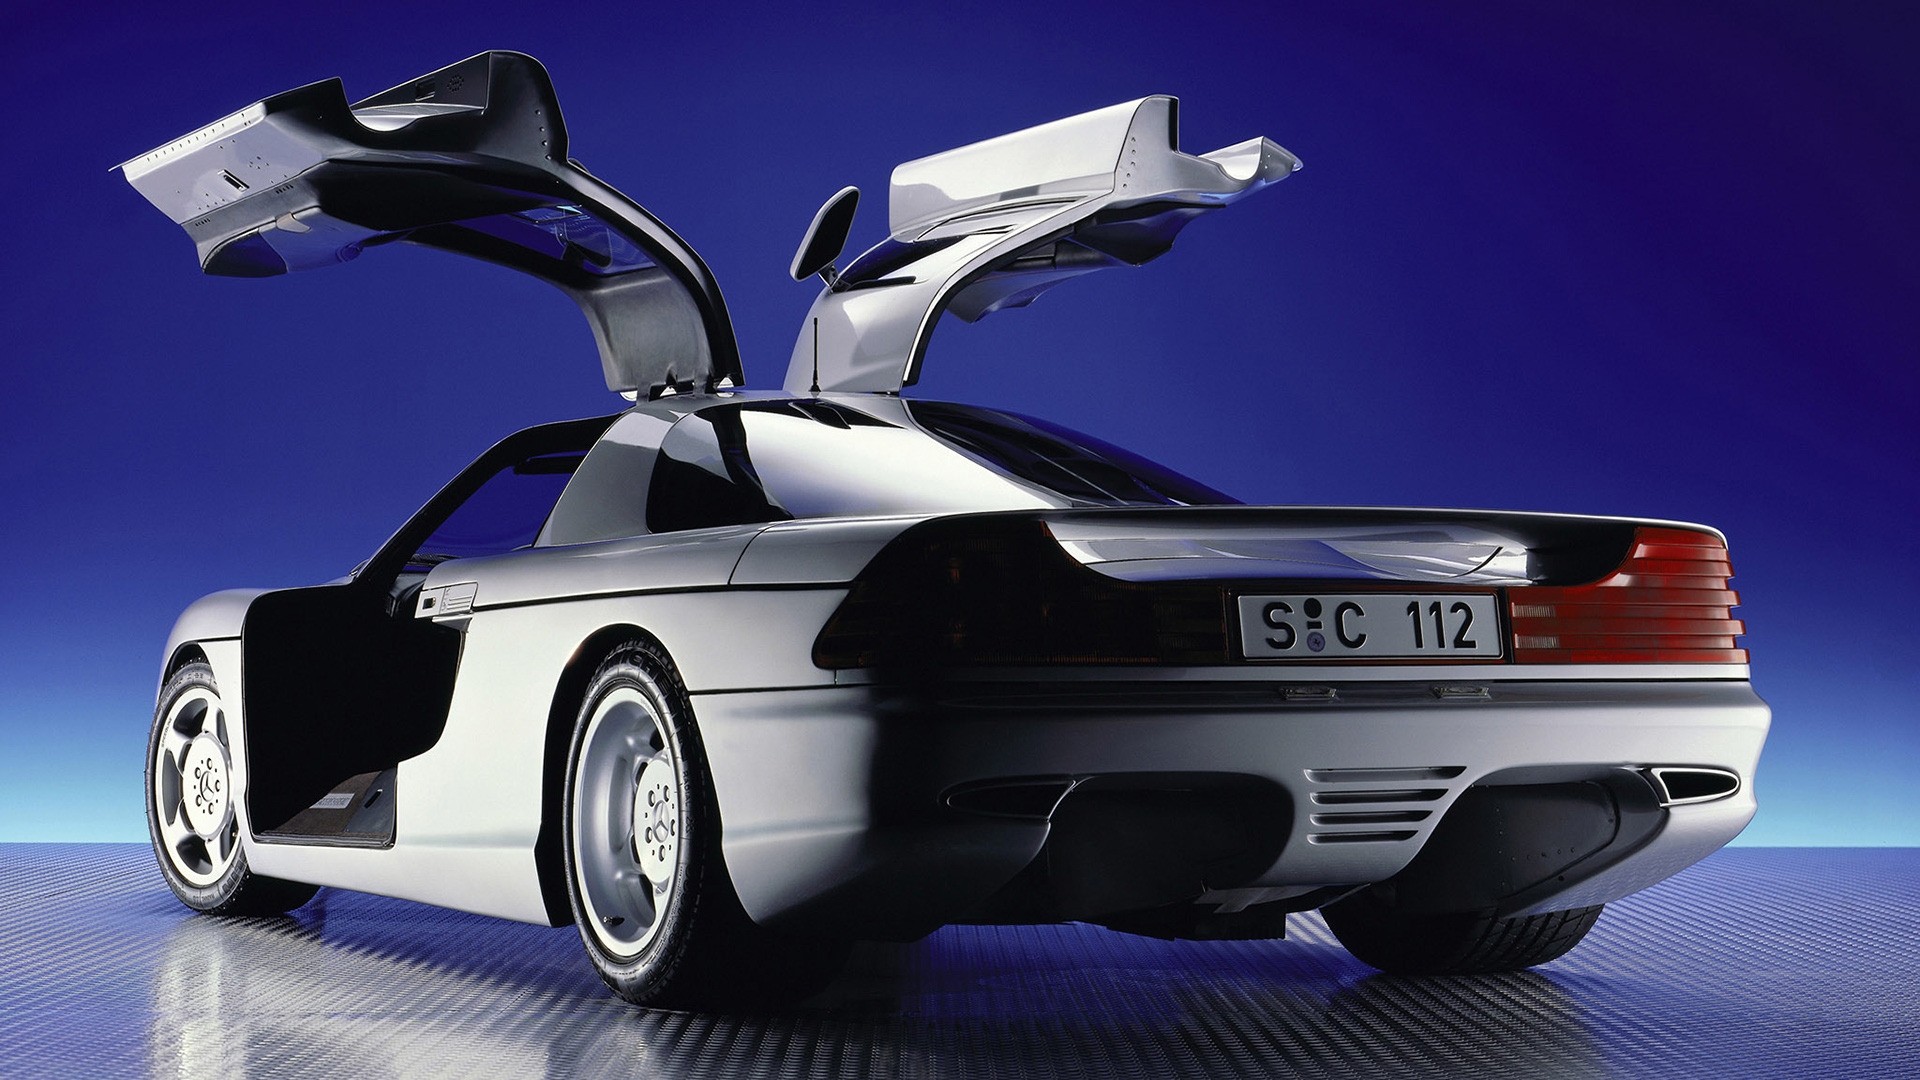 Mercedes C112 Concept 1991 for 1920 x 1080 HDTV 1080p resolution